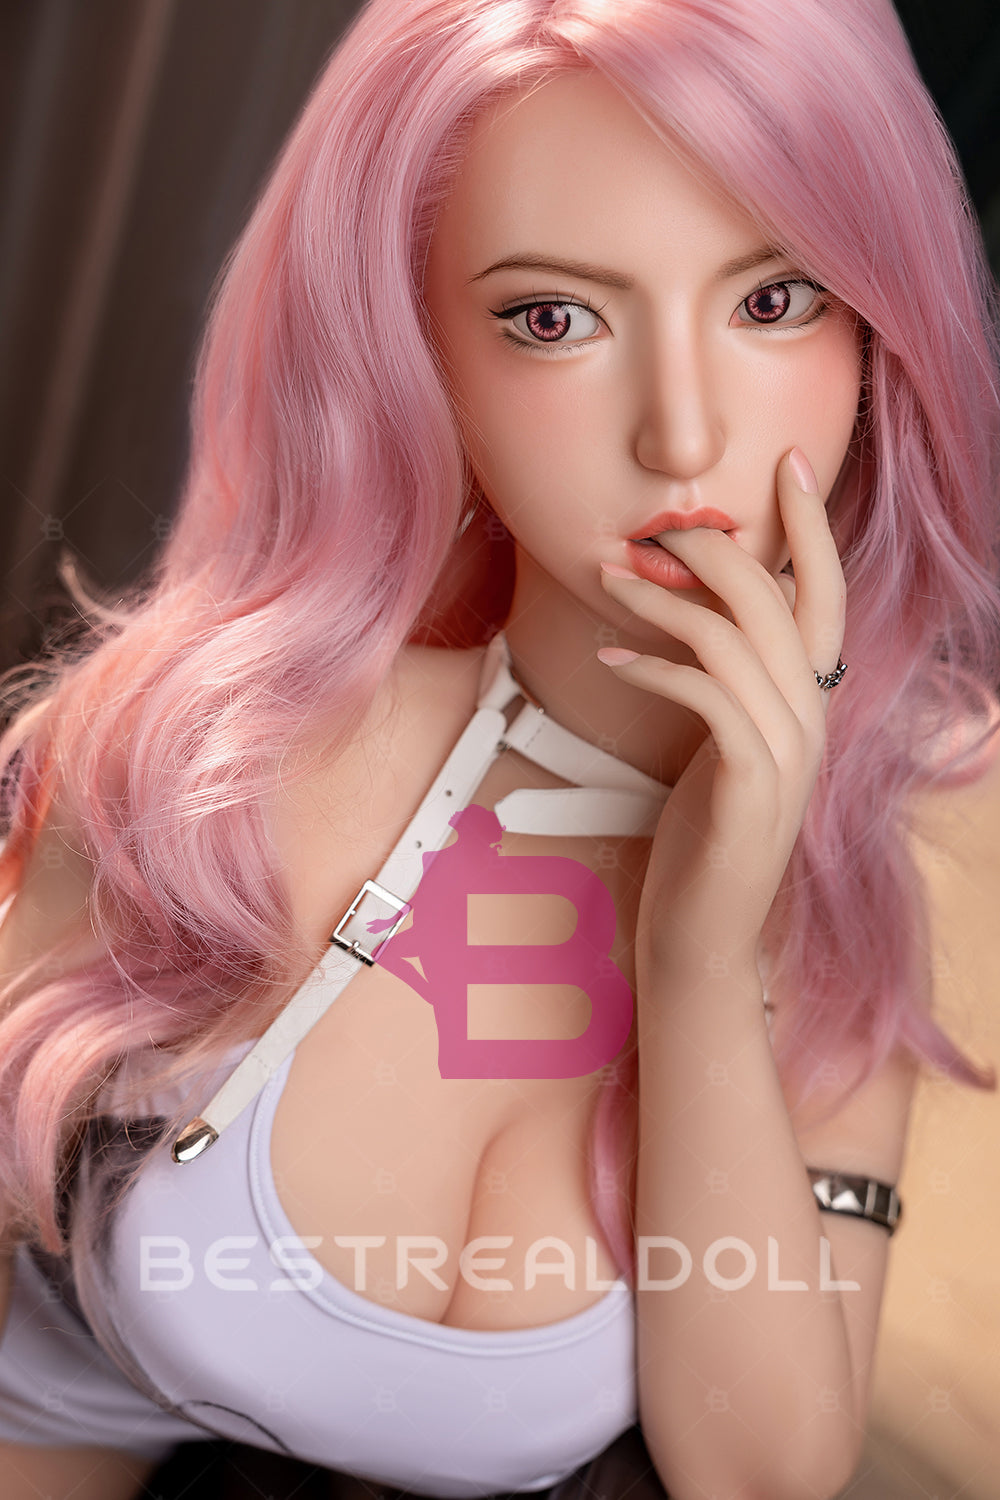 US Stock - YAMIEE Rylee 163cm Unique Design Silicone Head Blowjob Sex Doll TPE Body Adult Oral Sex Love Doll